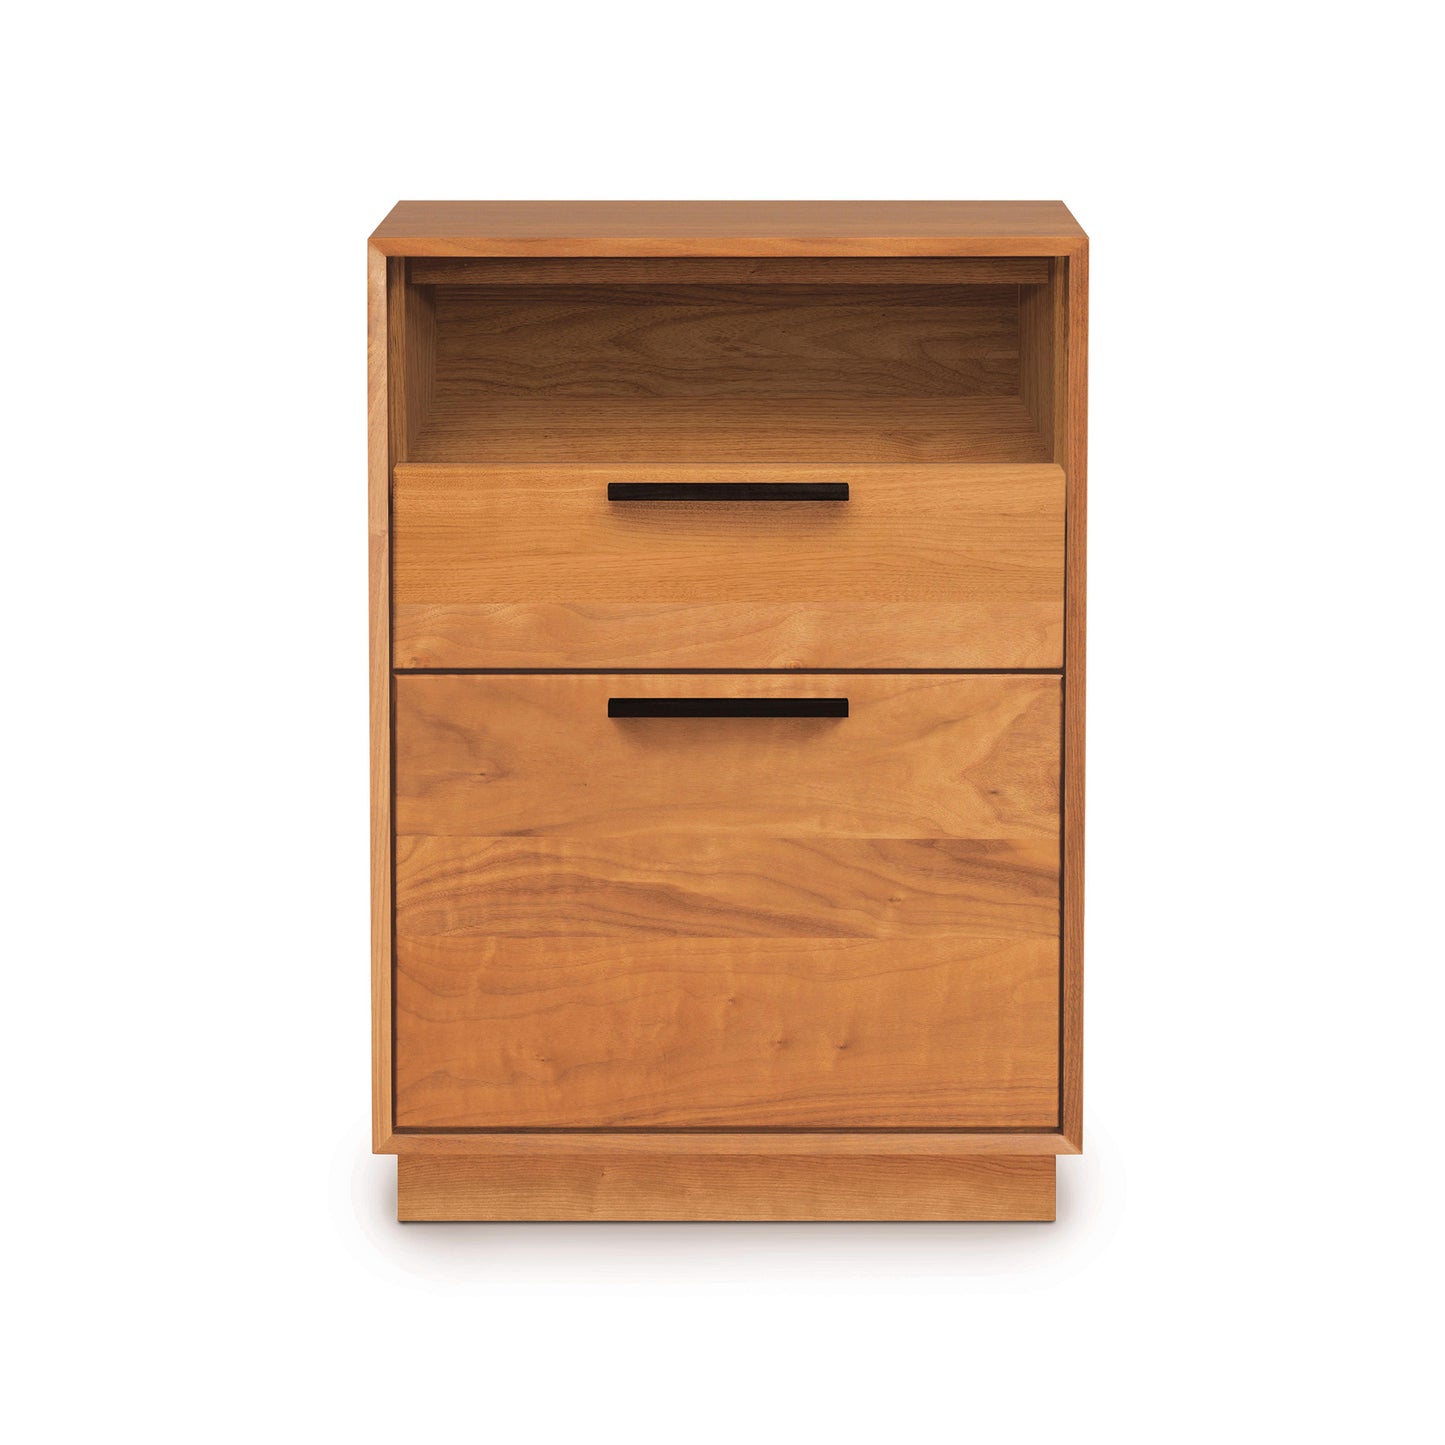 A Copeland Furniture Linear Narrow Rolling File Cabinet with Cubby with two drawers.